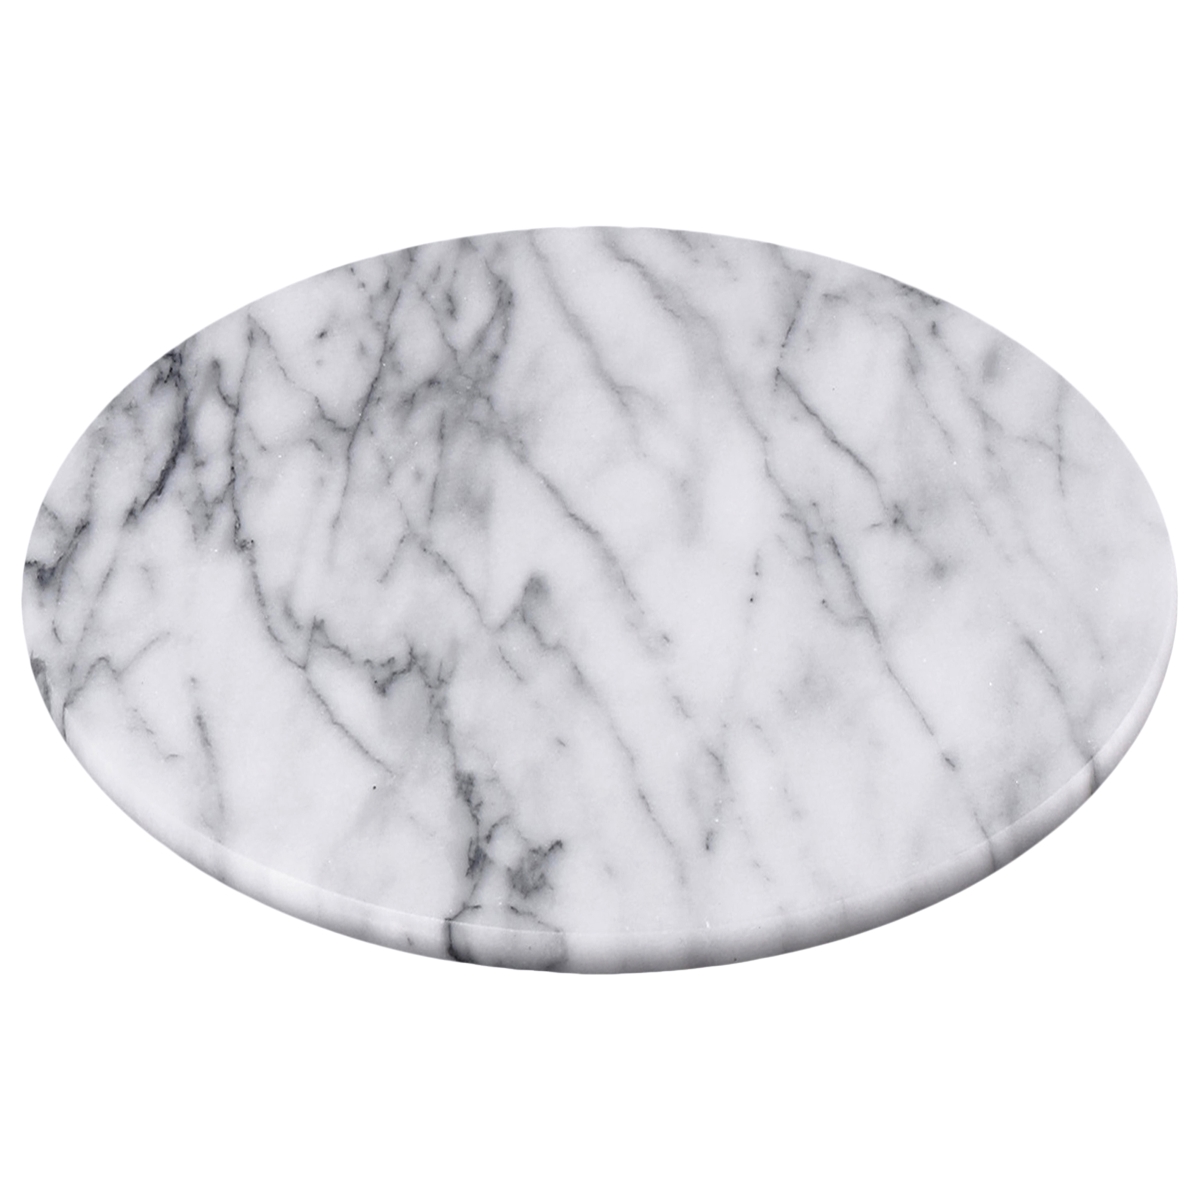 Picture of CREATIVE HOME 84077 Creative Home Natural Marble Round Trivet Cheese Board Dessert Serving Plate, 8' Diam, Off-White (patterns may vary)